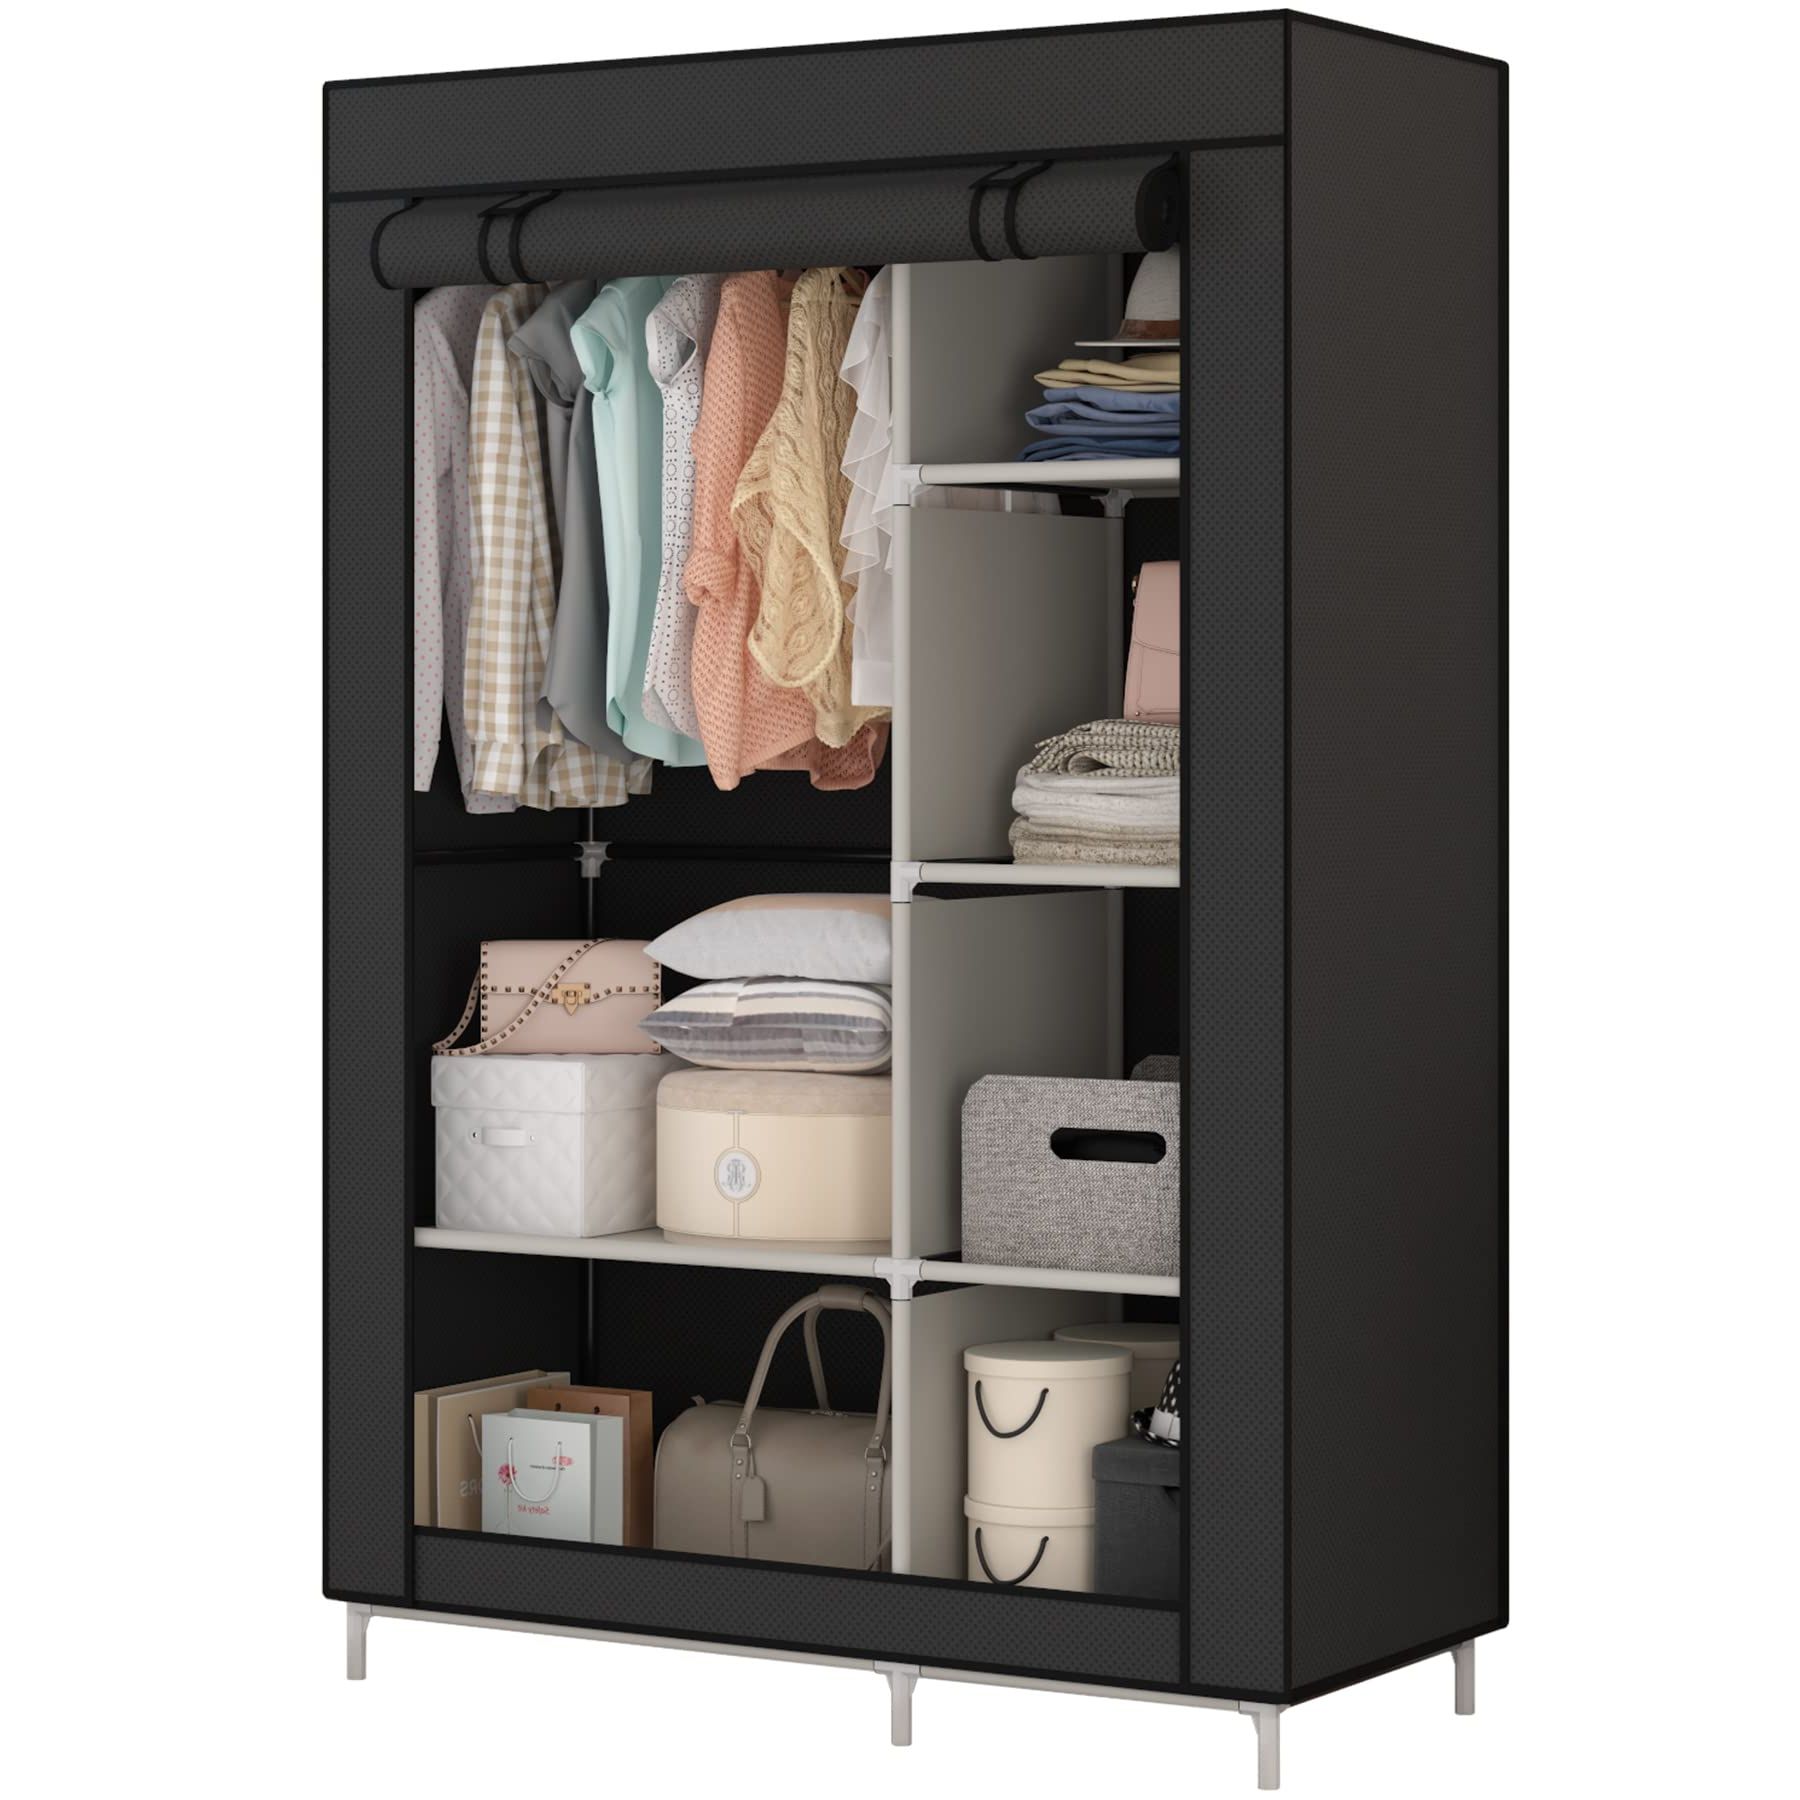 2018 Amazon: Calmootey Closet Storage Organizer,portable Wardrobe With 6  Shelves And Clothes Rod,non Woven Fabric Cover With 4 Side Pockets,black :  Home & Kitchen With Regard To 6 Shelf Wardrobes (View 3 of 10)